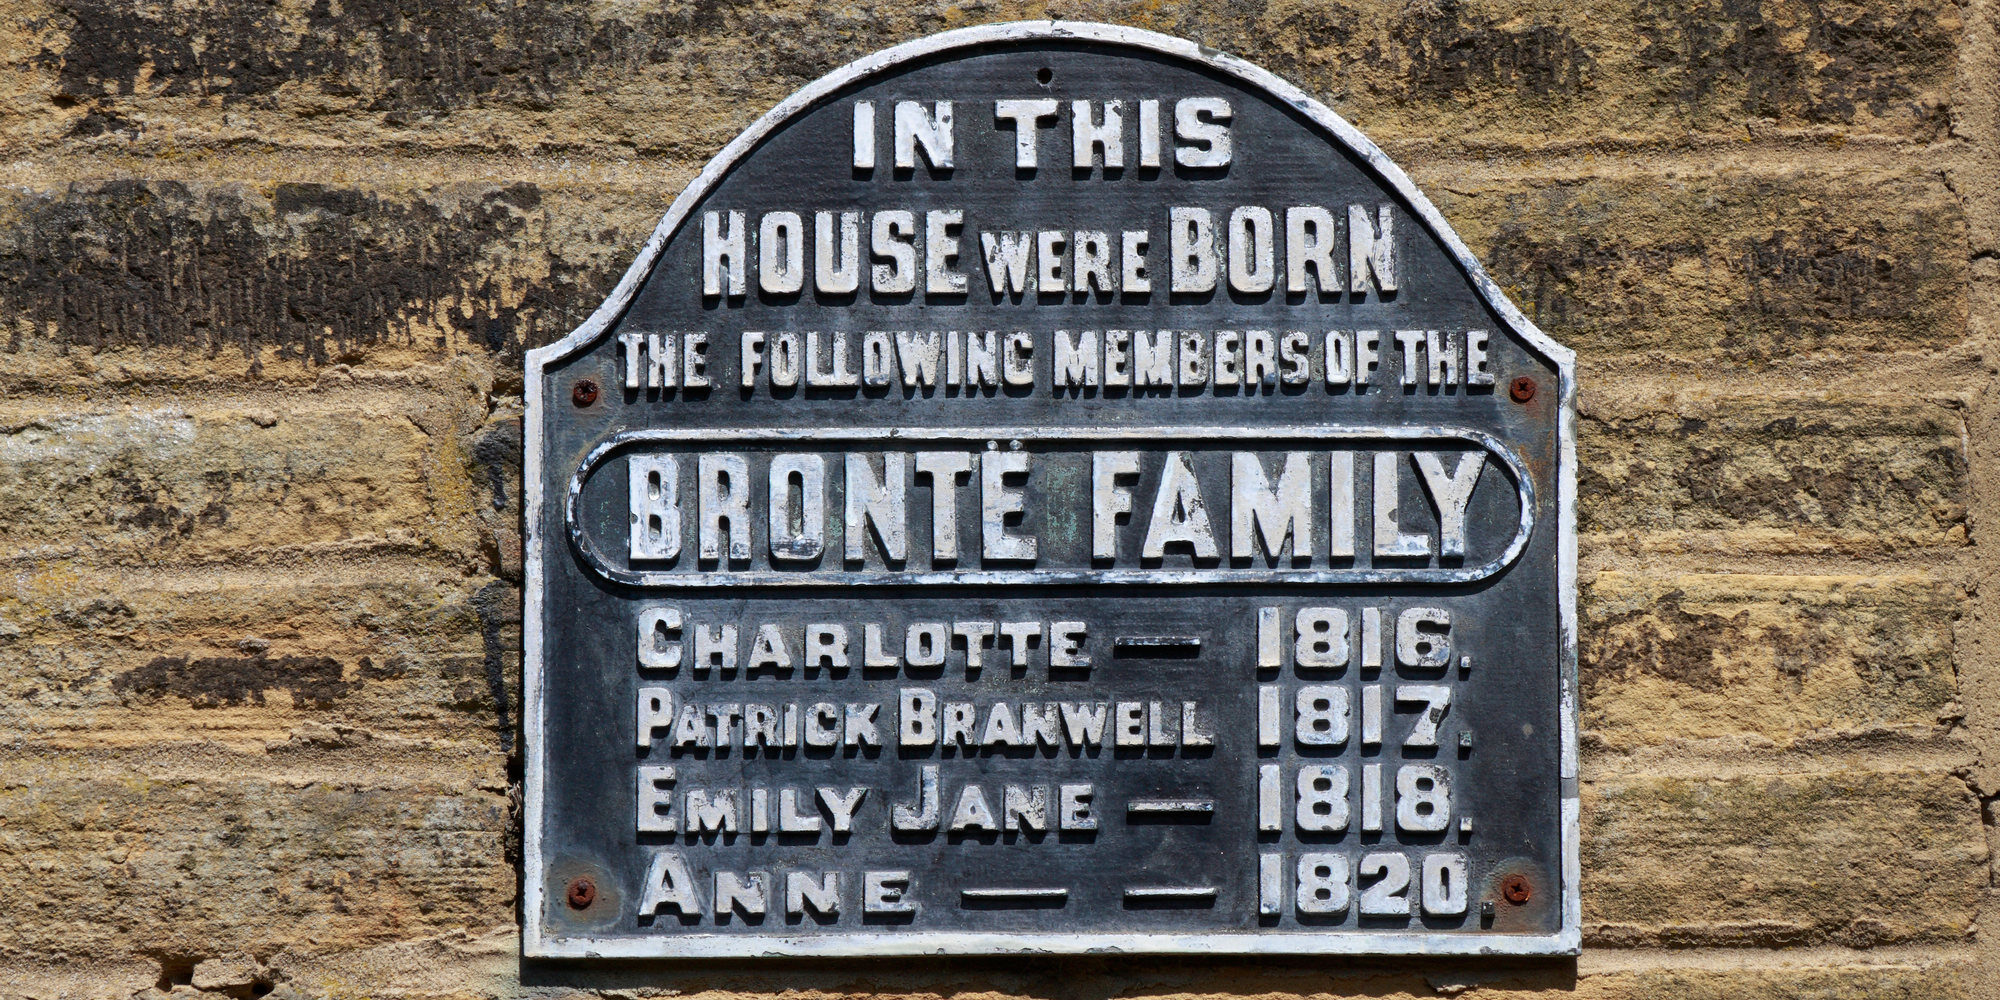 CPR97T Bronte family birthplace plaque, Thornton, Bradford, West Yorkshire, England, UK.